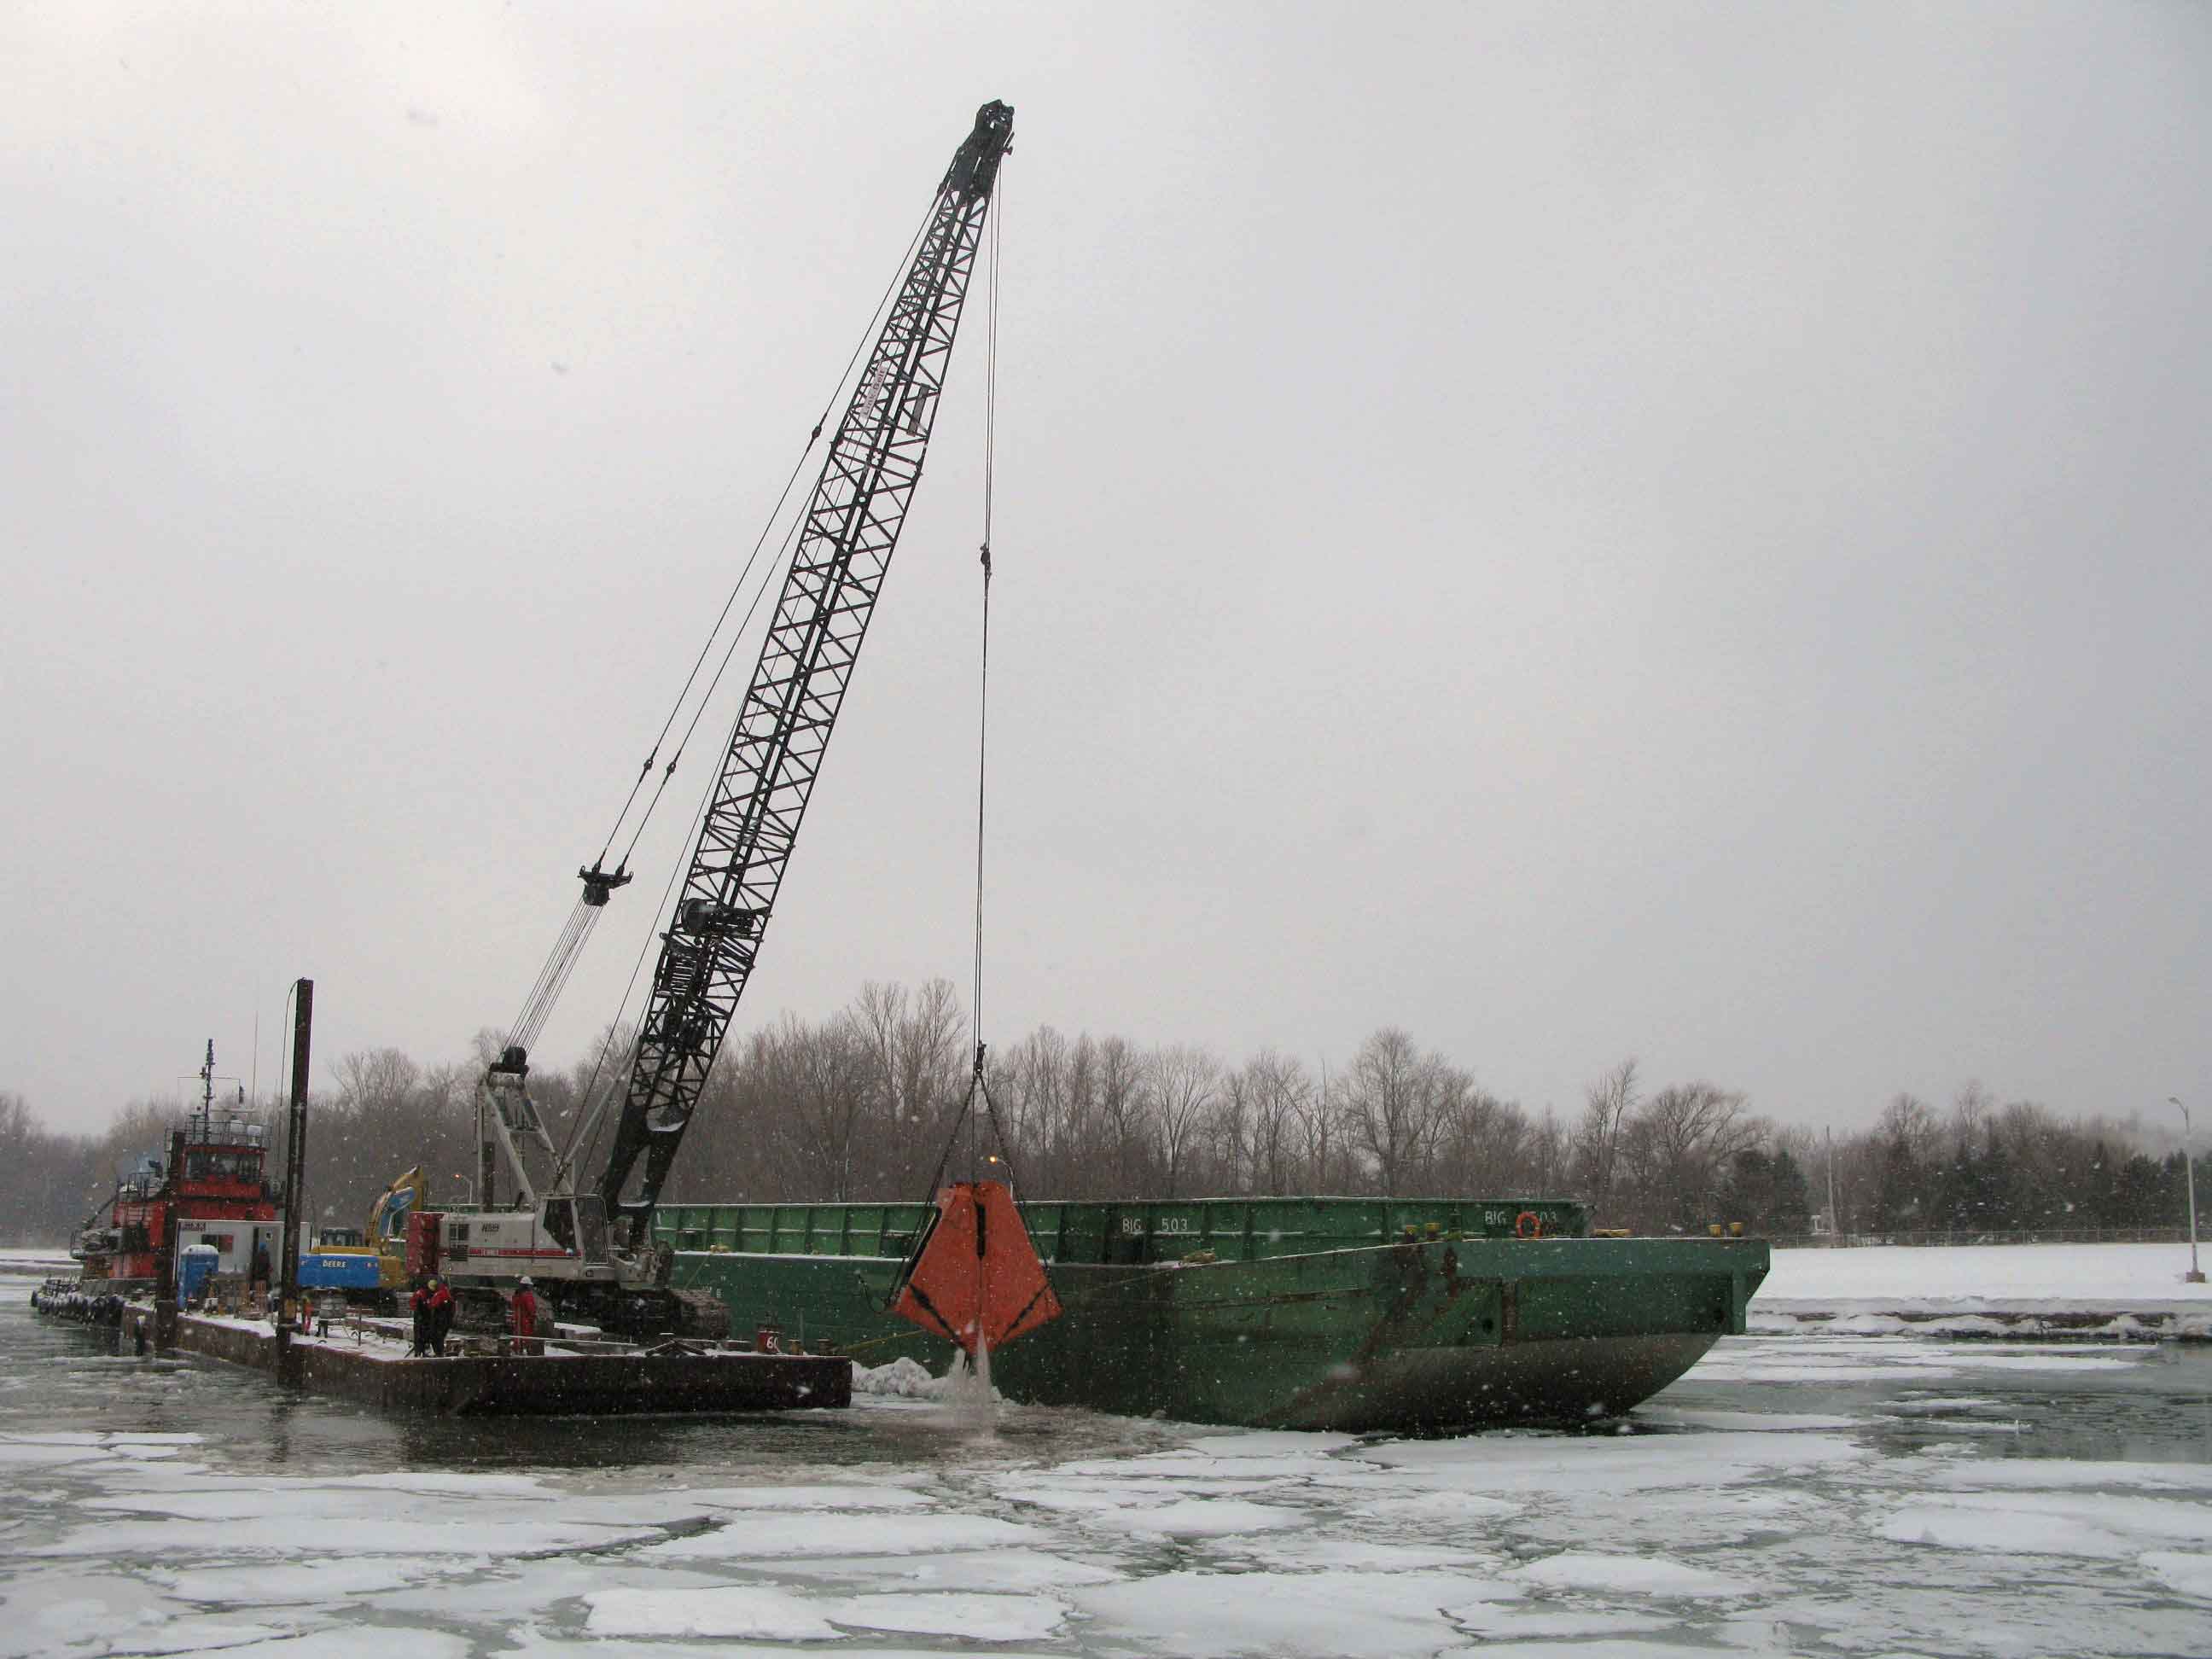 115 ton Link Belt Crane with Cable Arm Bucket loading barge. Equipment on 500 ton work barge converted to a spud barge